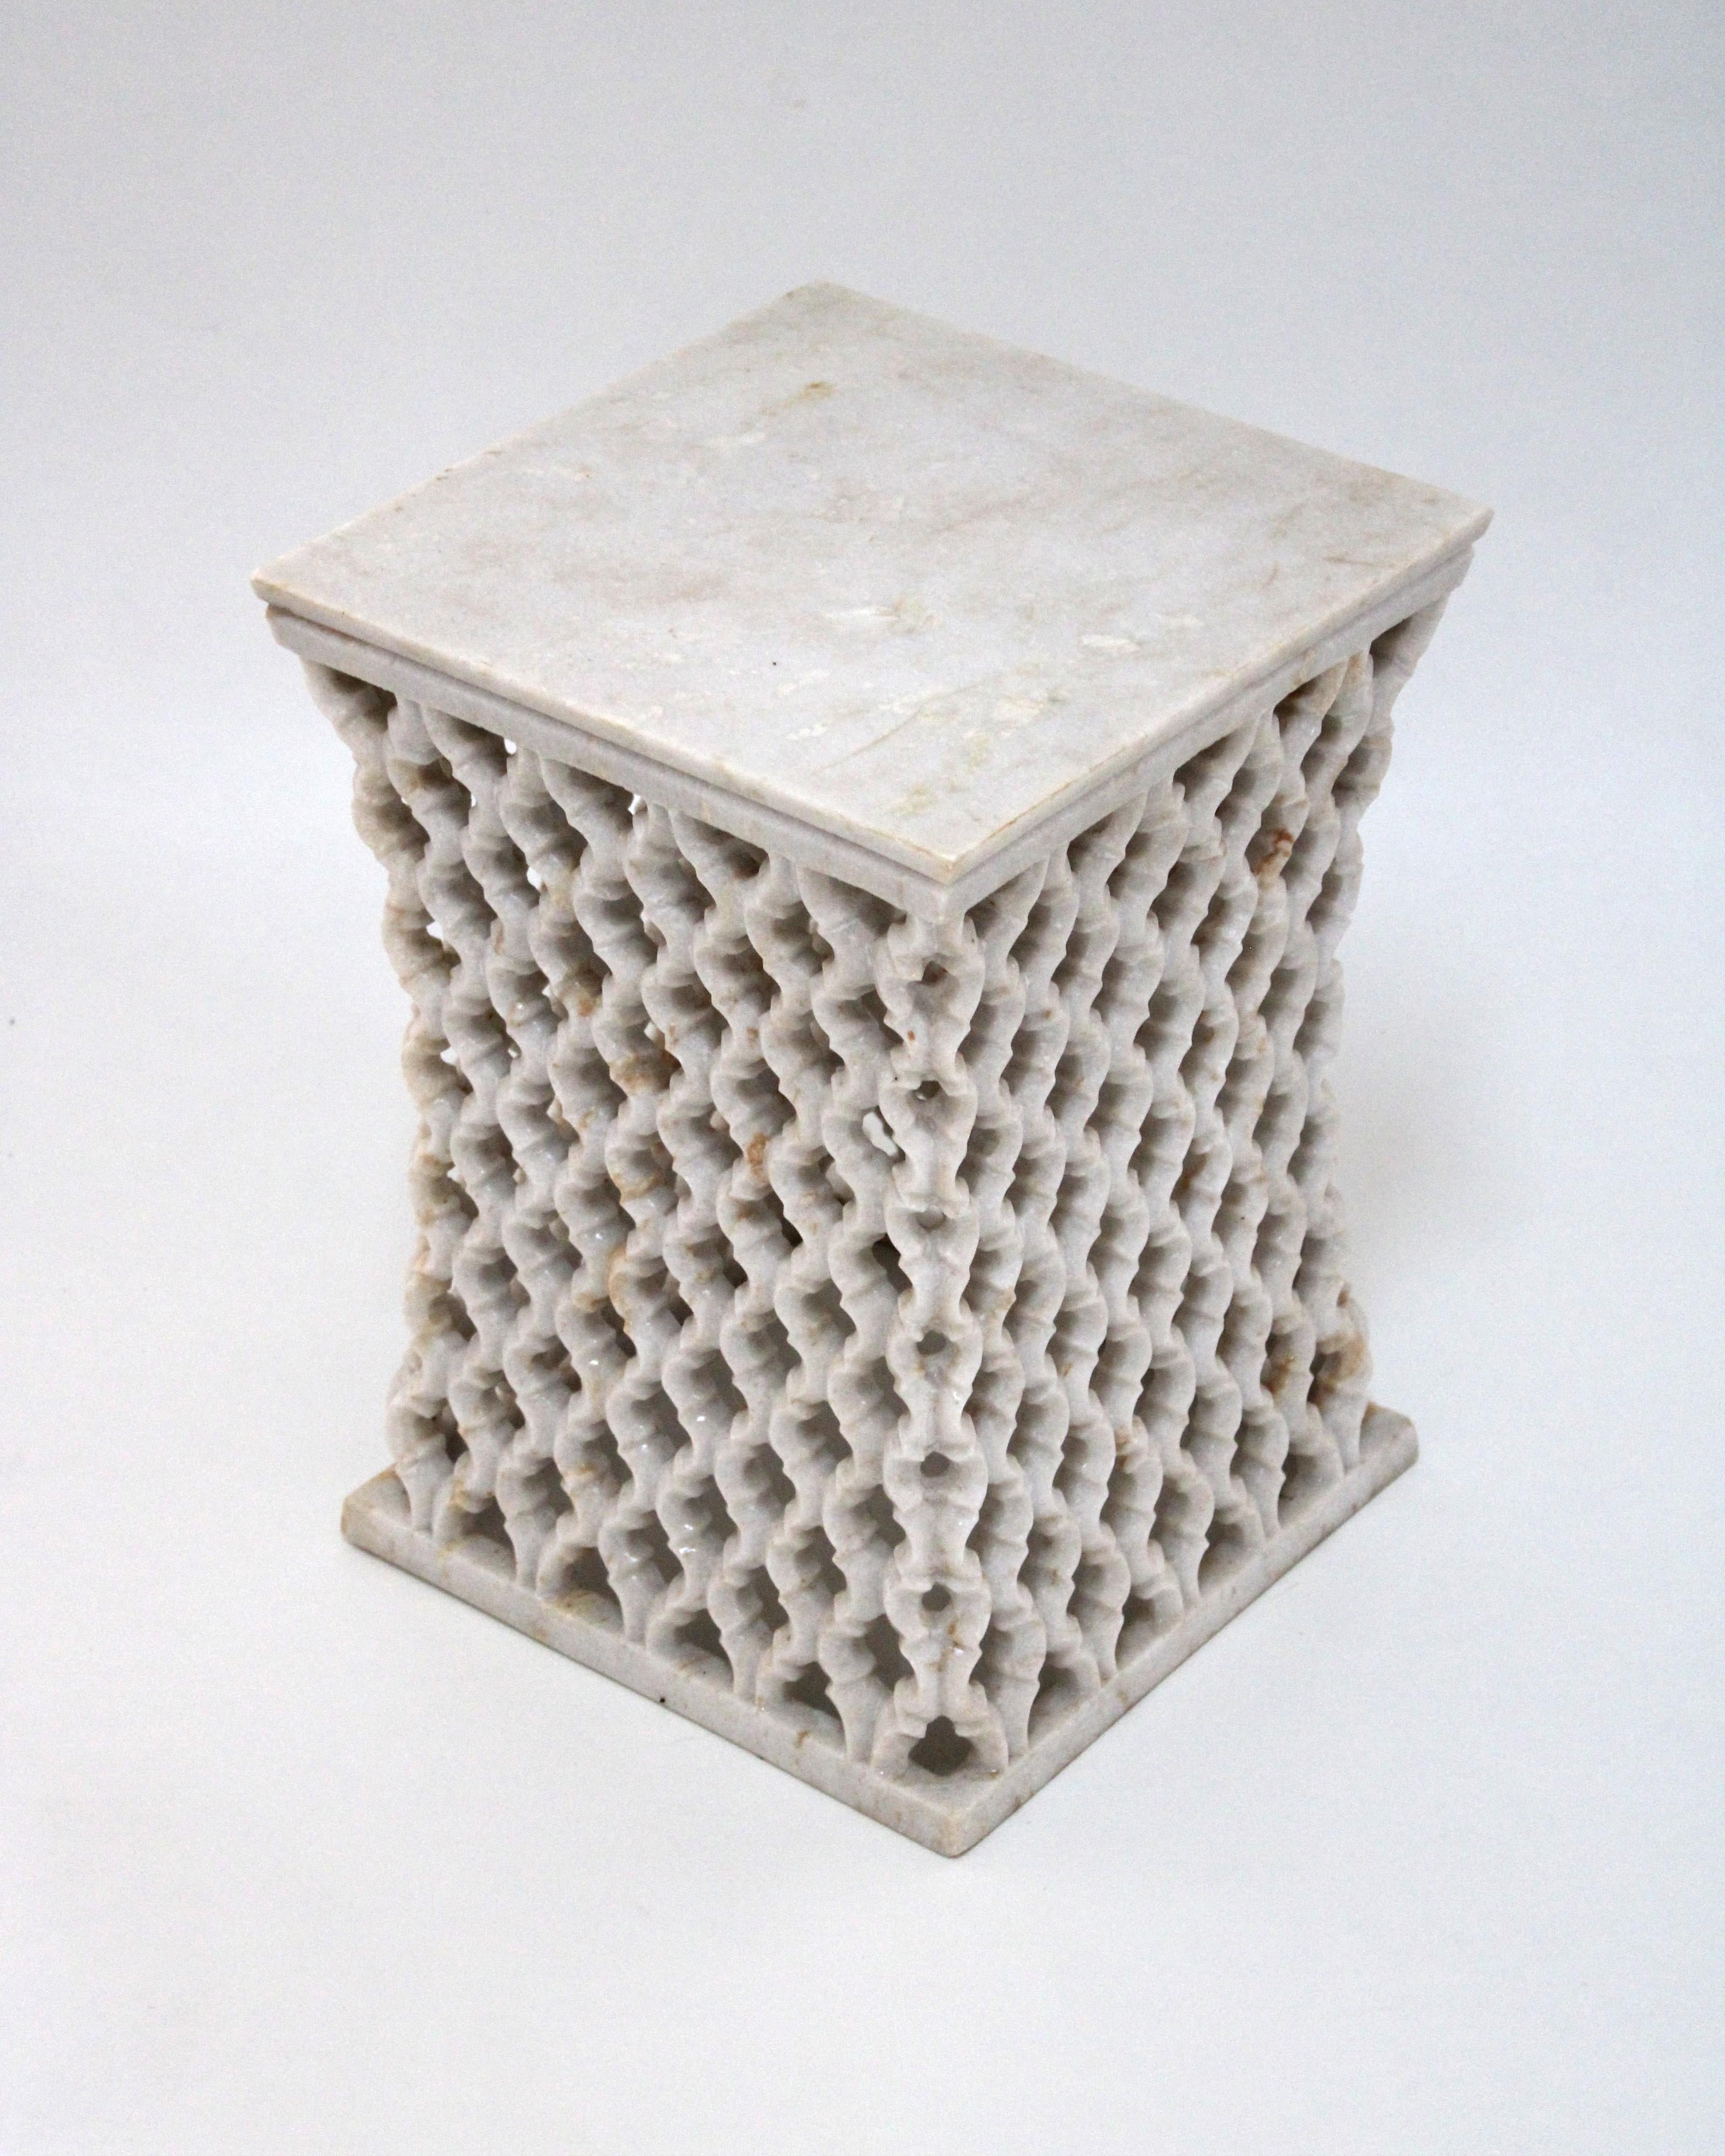 Modern marble side table or bedside tables by Paul Mathieu for Stephanie Odegard are inspired by the elegant pierced marble “Jali” screens and windows he saw in the palaces of Mughal India. These bedside tables or this marble side table is a true